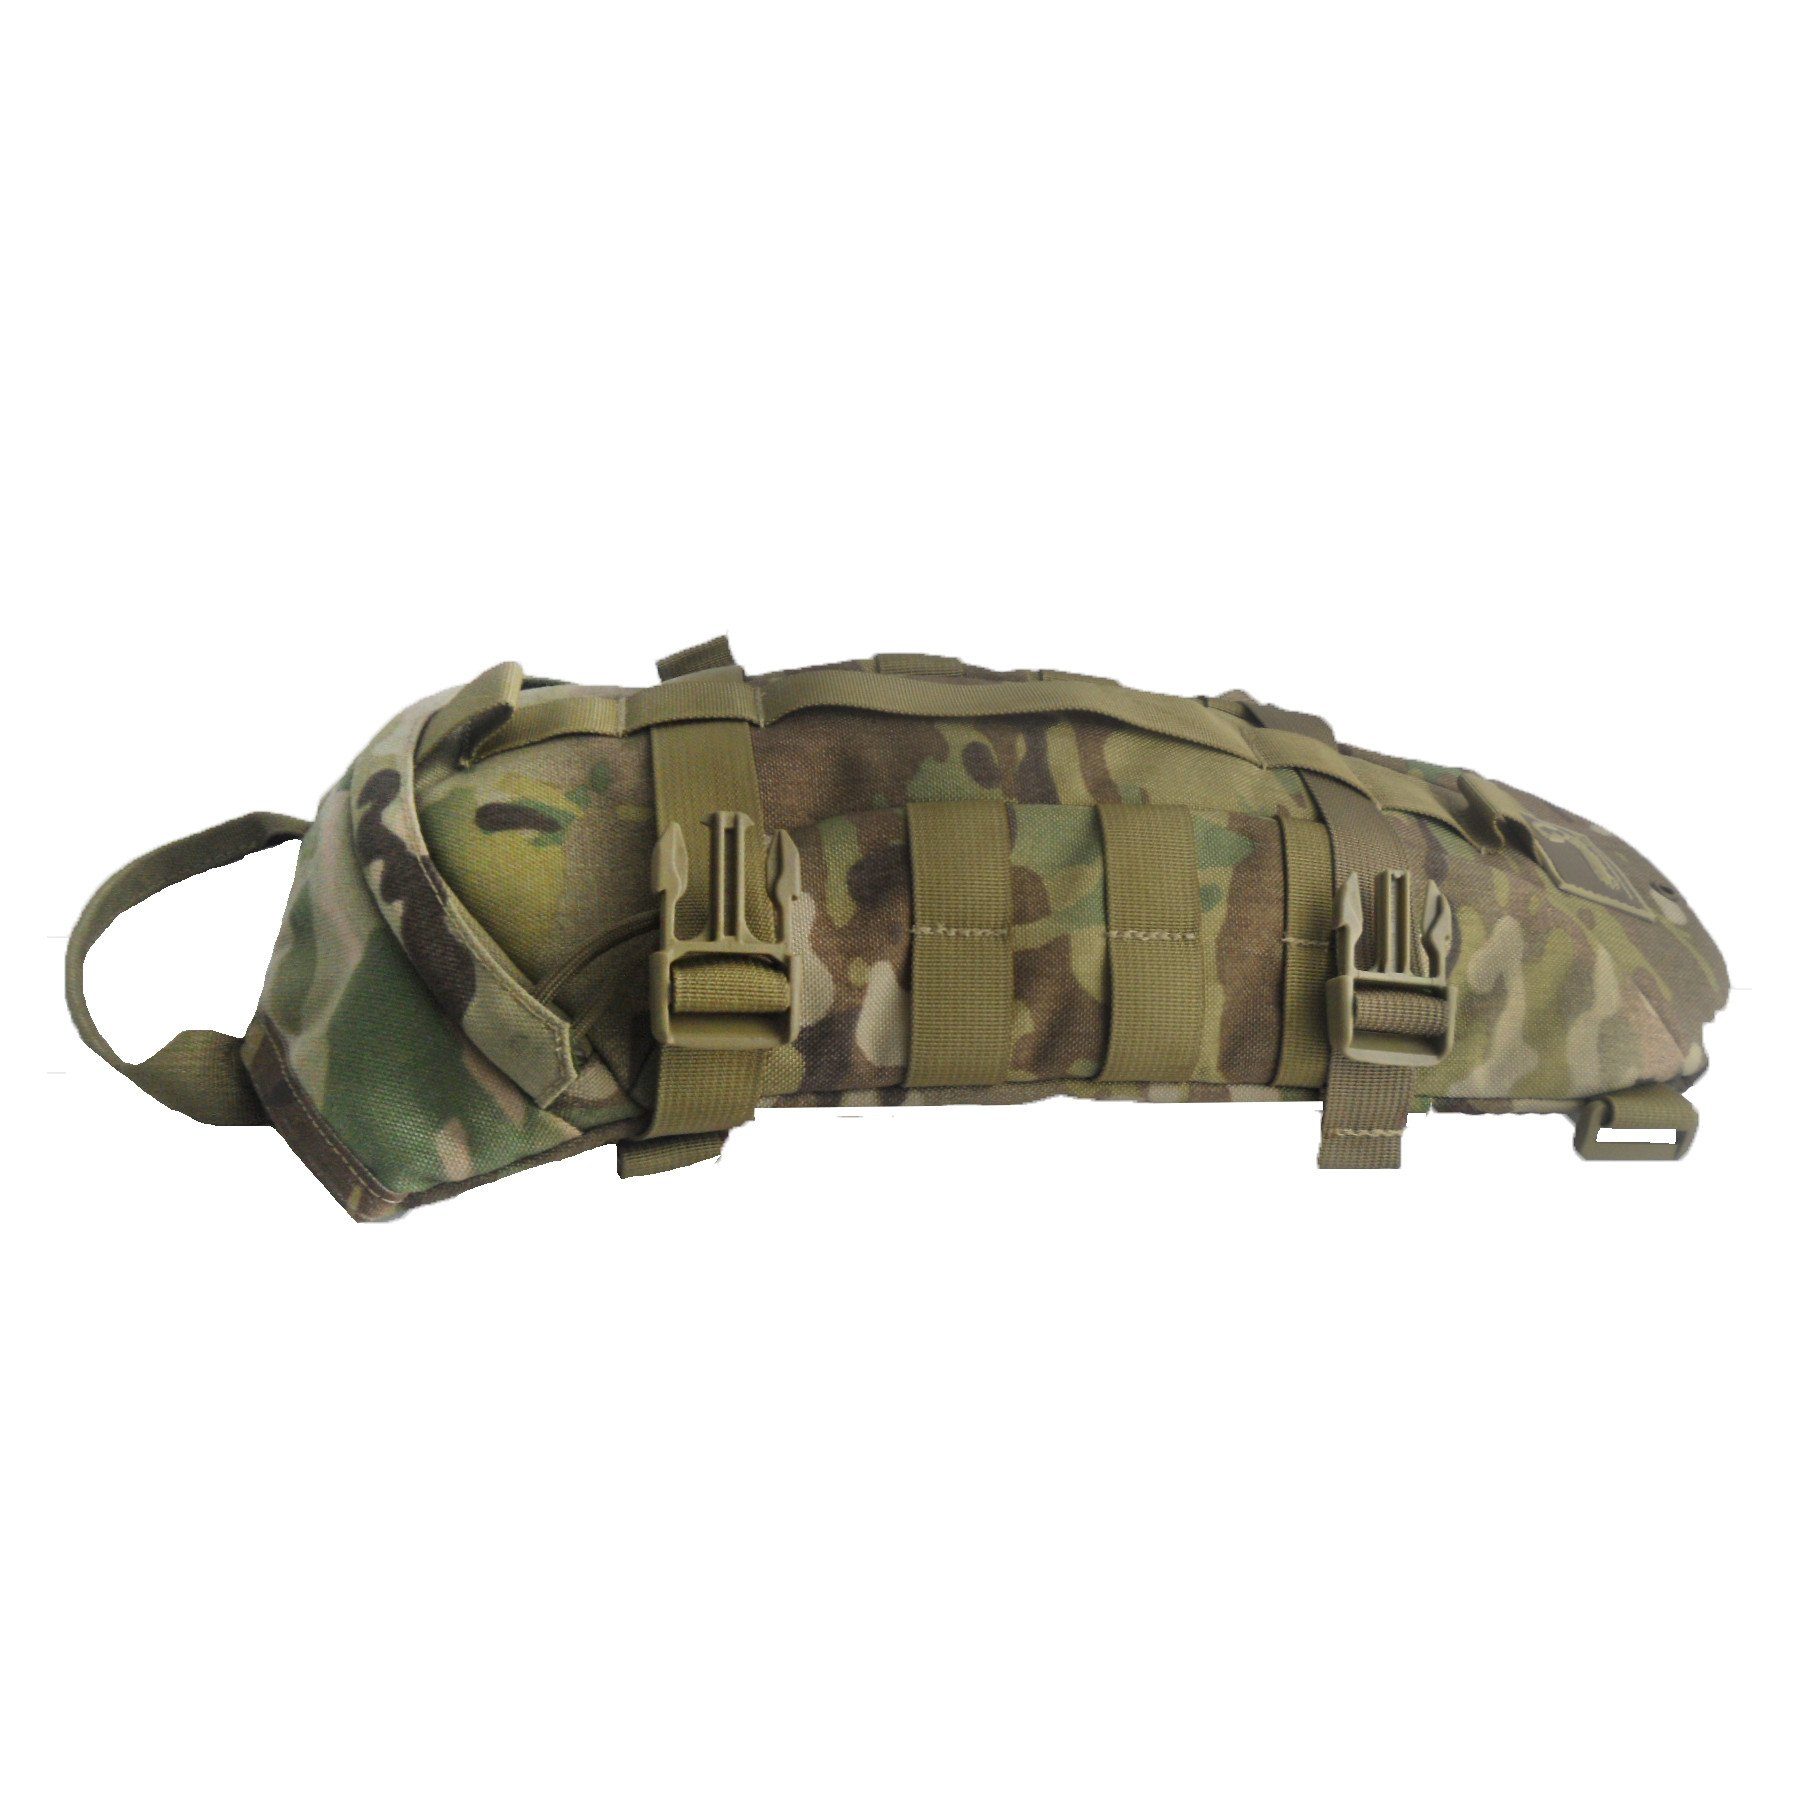 MOLLE Accessories: Miracle Equipment for High-Performance Teams